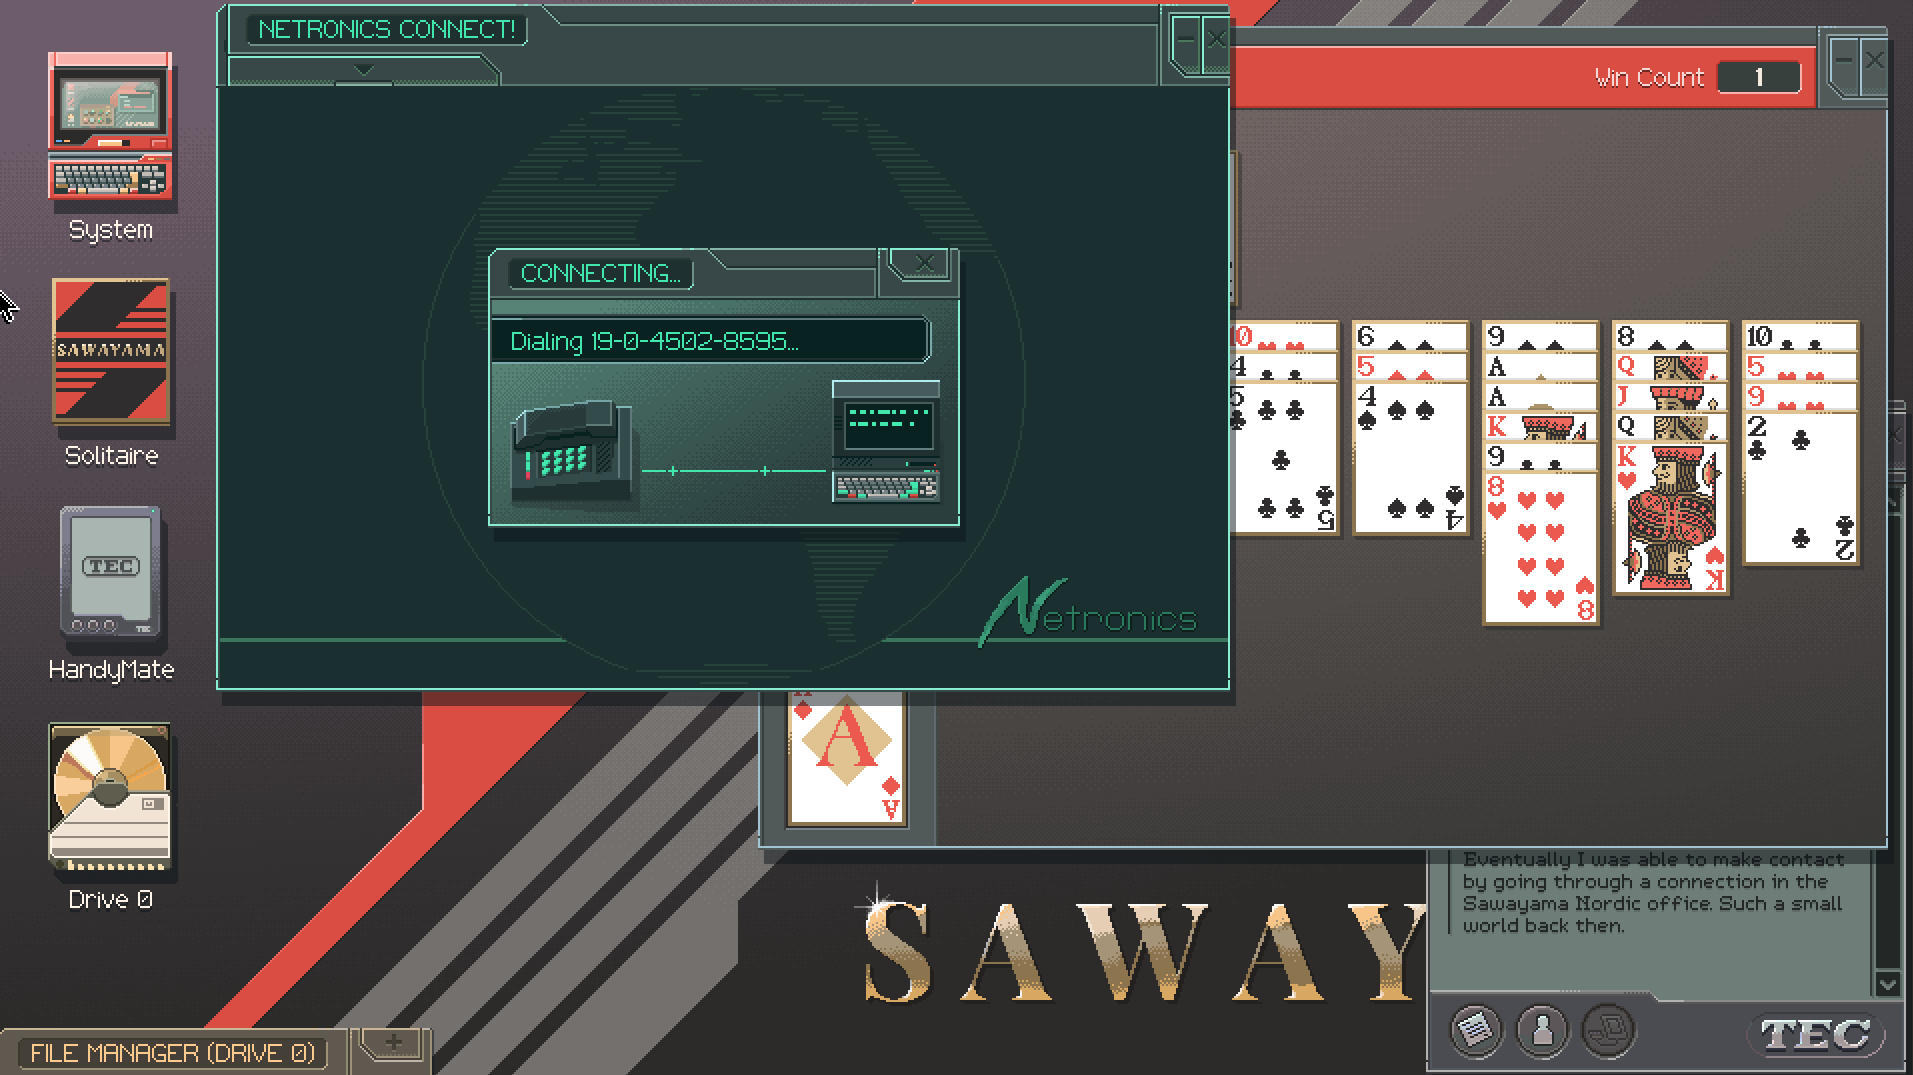 Screenshot of the game Last Call BBS, showing a fictional operating system initiating a dial-up connection to a BBS; a game of Solitaire can be seen in the background.